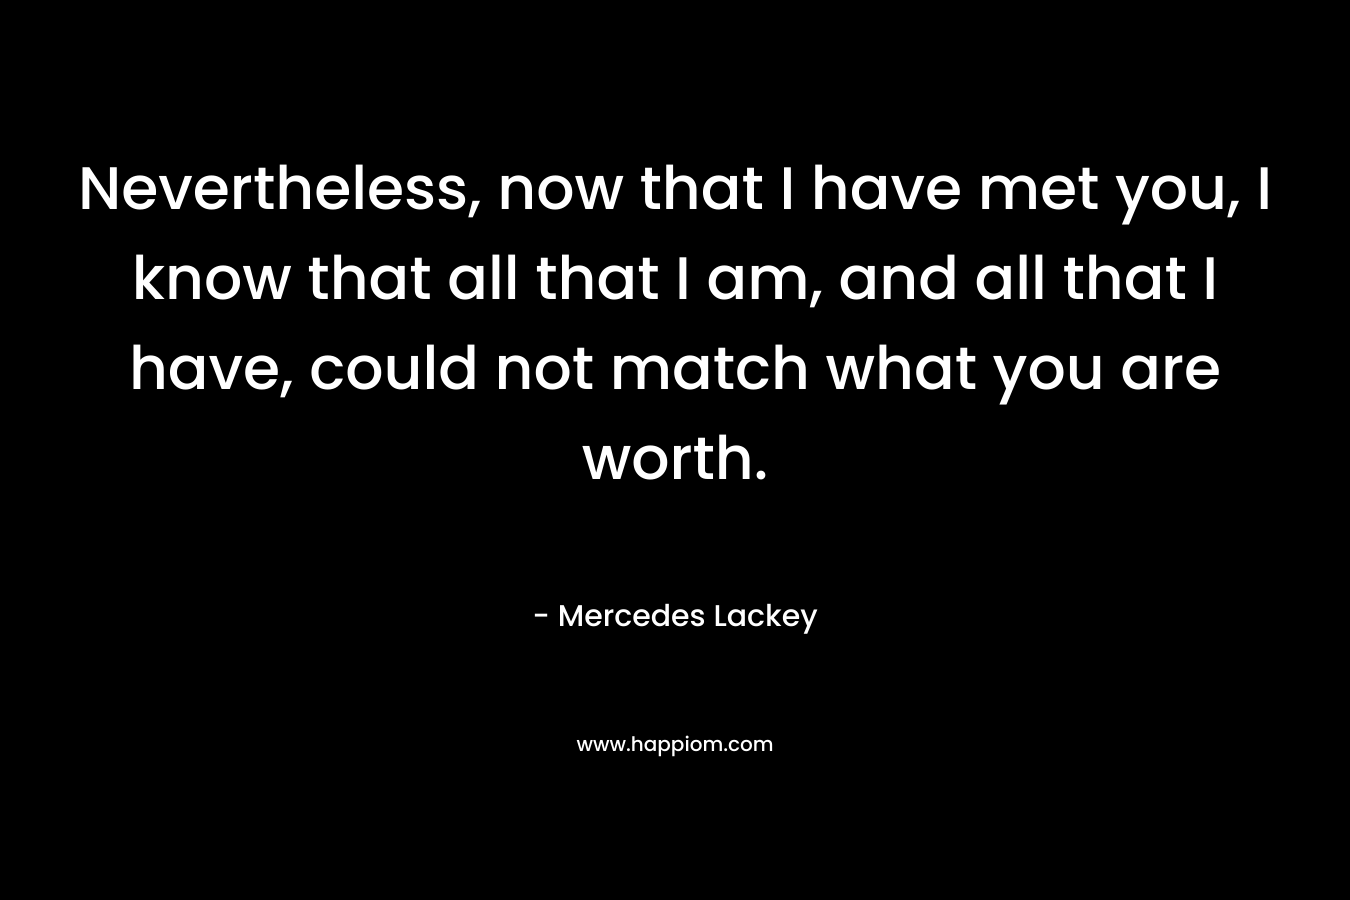 Nevertheless, now that I have met you, I know that all that I am, and all that I have, could not match what you are worth. – Mercedes Lackey